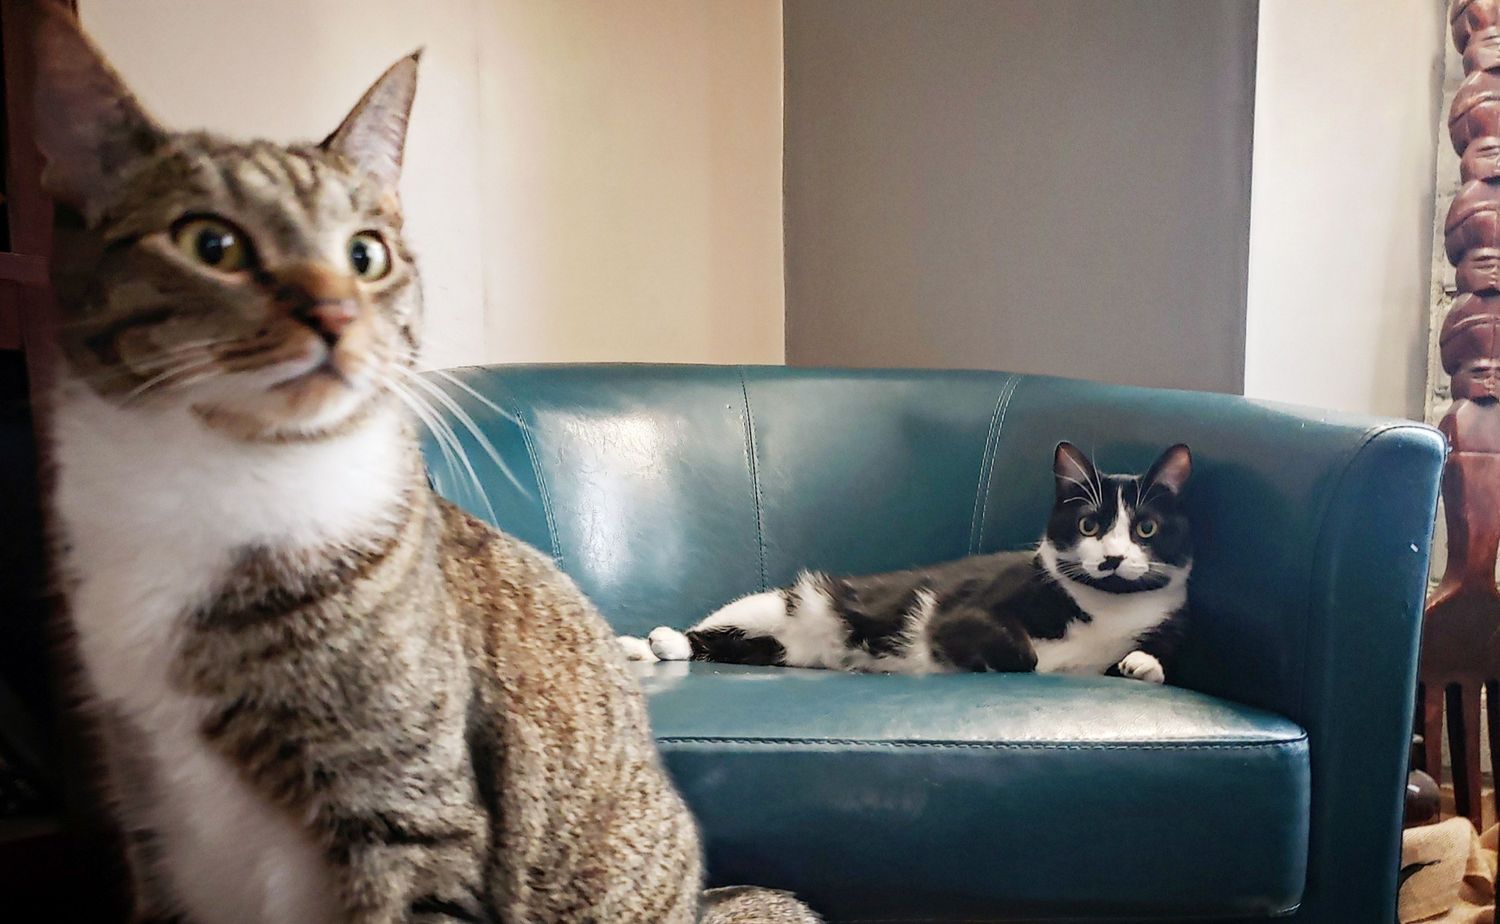 Gallery Photo of Business cats who have signed confidentiality agreements. They love our secure, Telehealth appointments. 